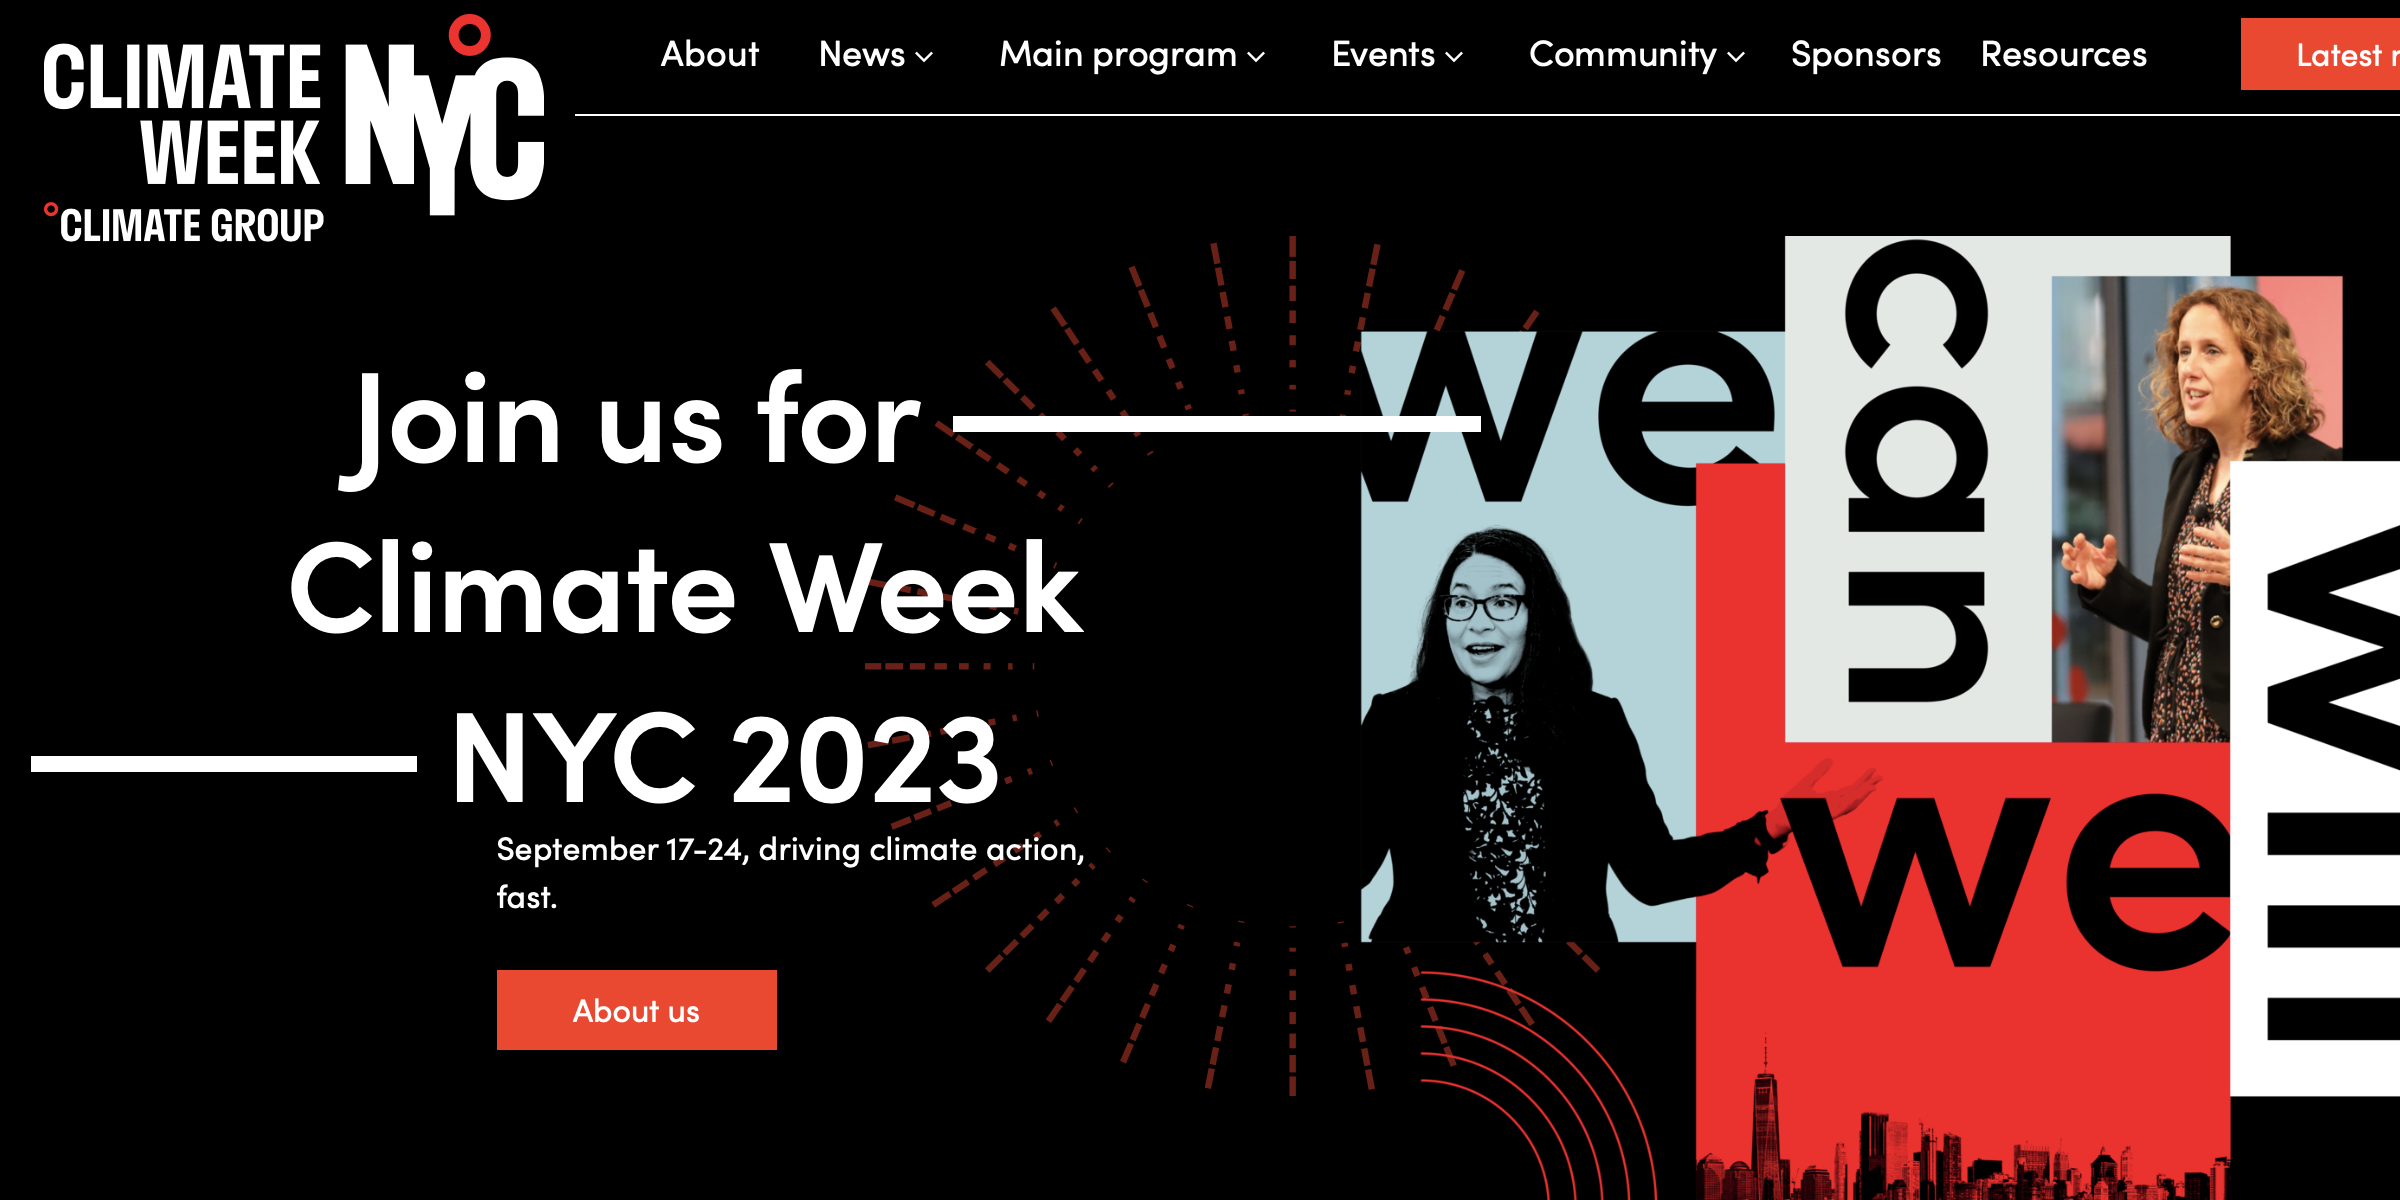 Promotional image for OWL ESG's participation in Climate Week NYC 2023, featuring the company logo and event details, highlighting their commitment to addressing climate change and promoting sustainable practices.